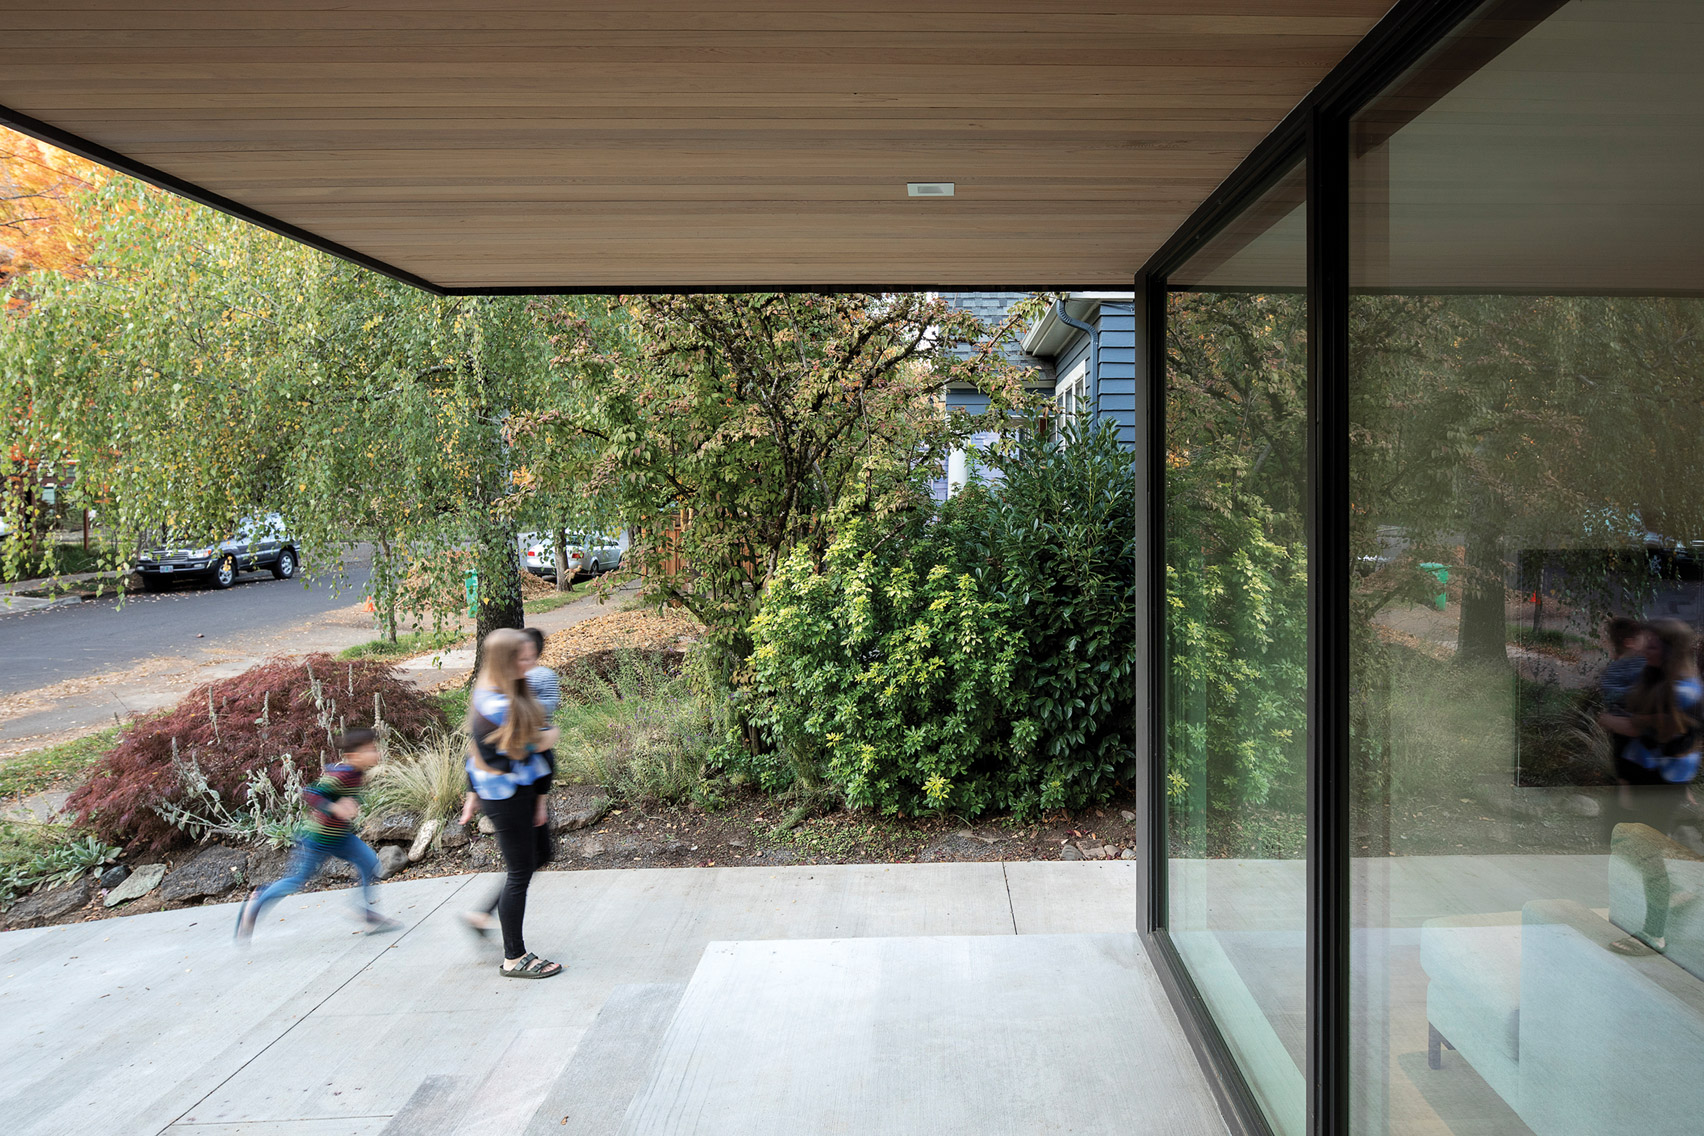 House on 36th by Beebe Skidmore in Portland, USA